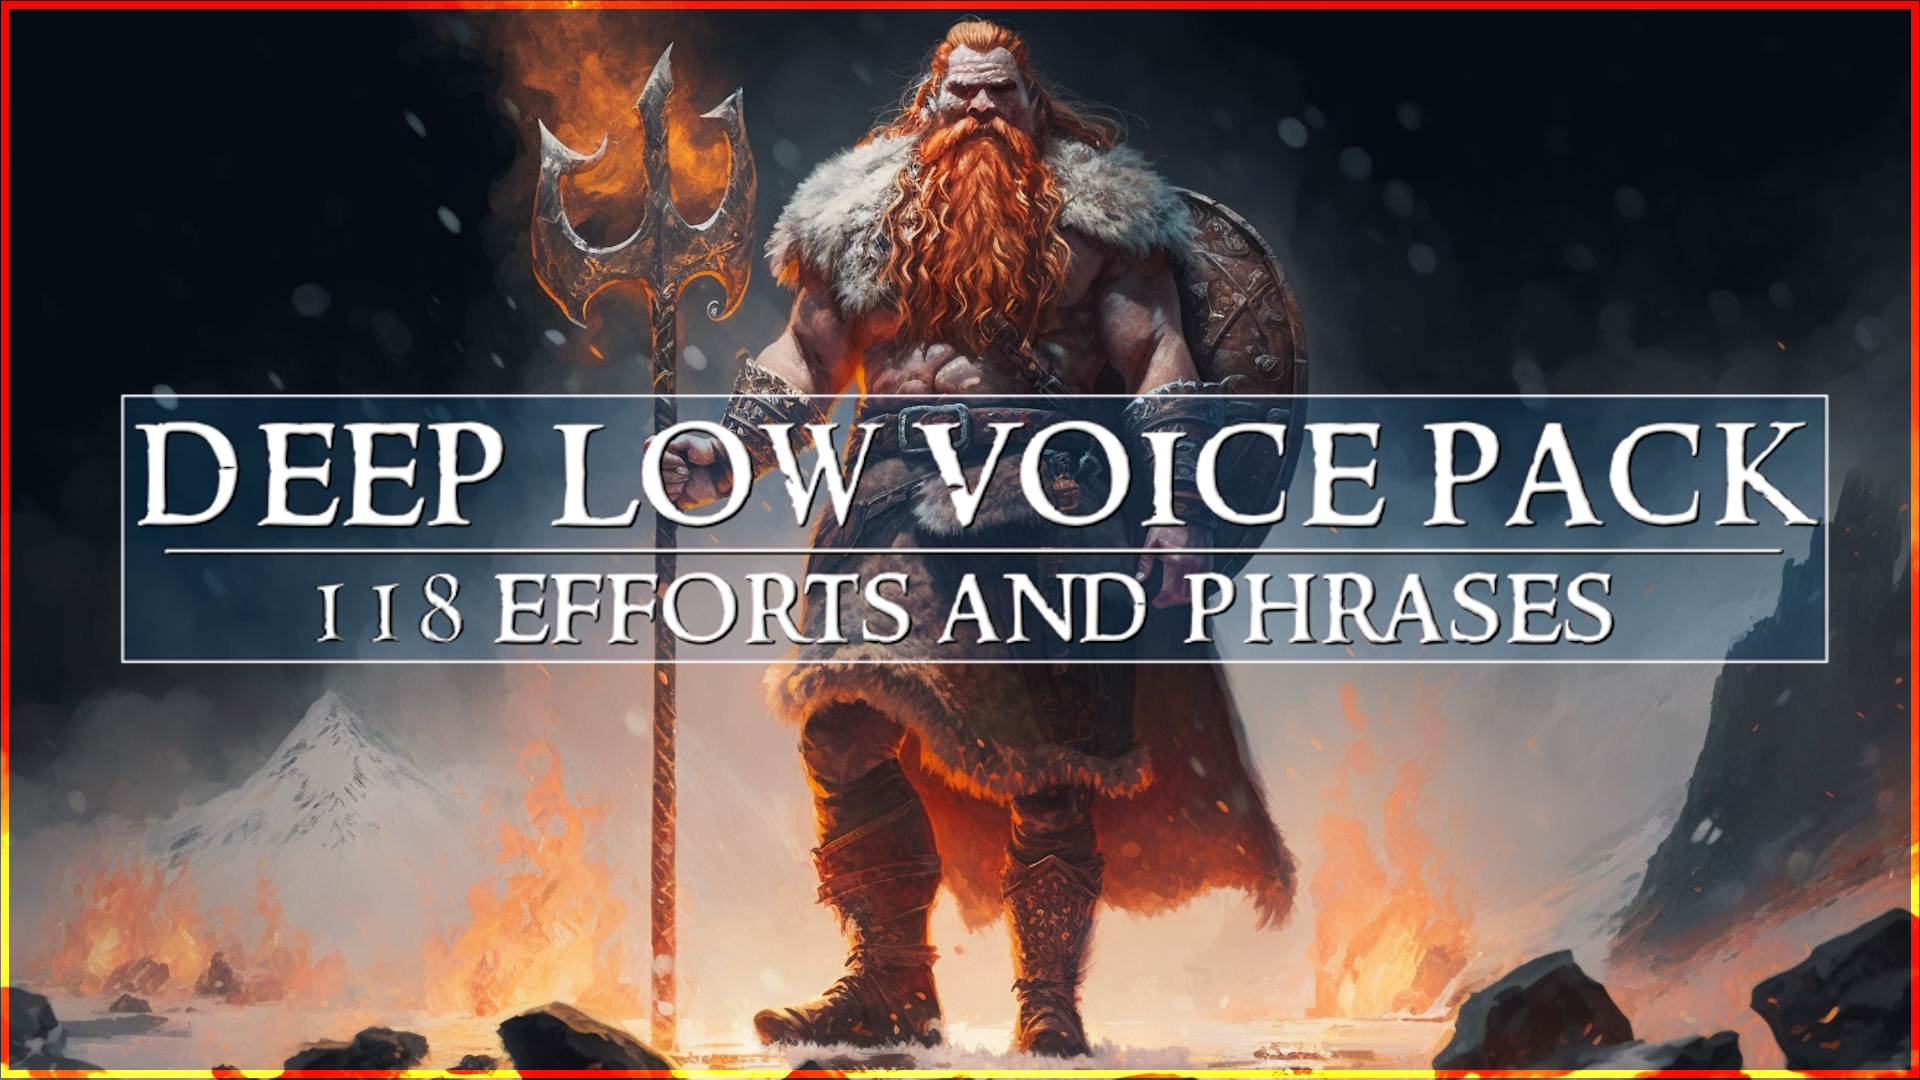 Deep Voice Warrior Pack 118 Efforts and Phrases